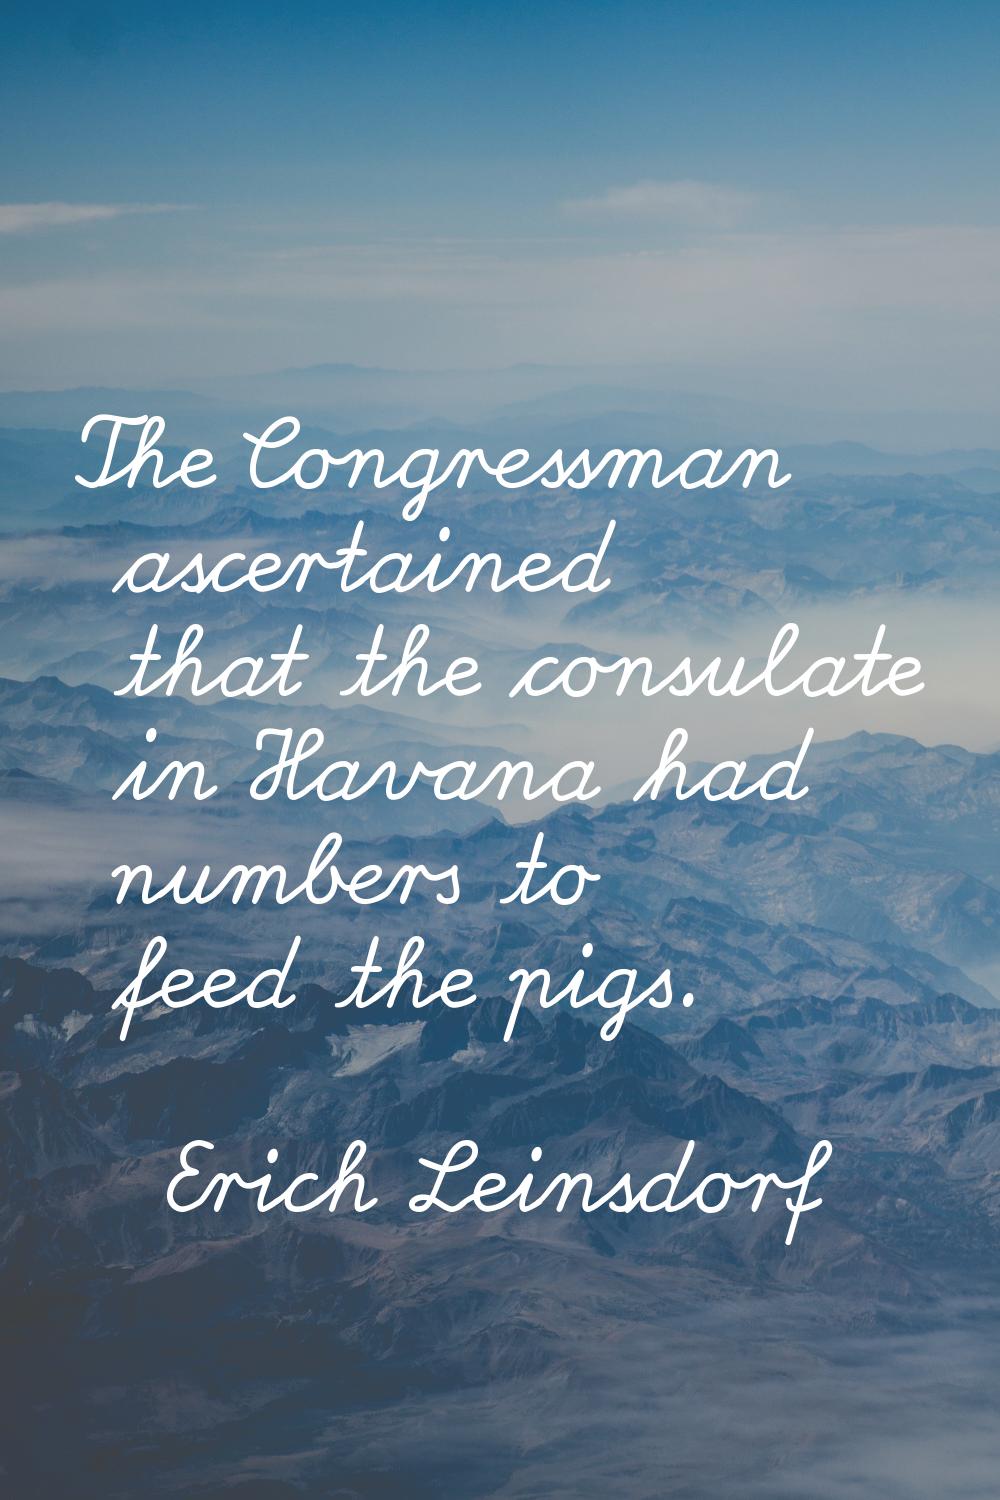 The Congressman ascertained that the consulate in Havana had numbers to feed the pigs.